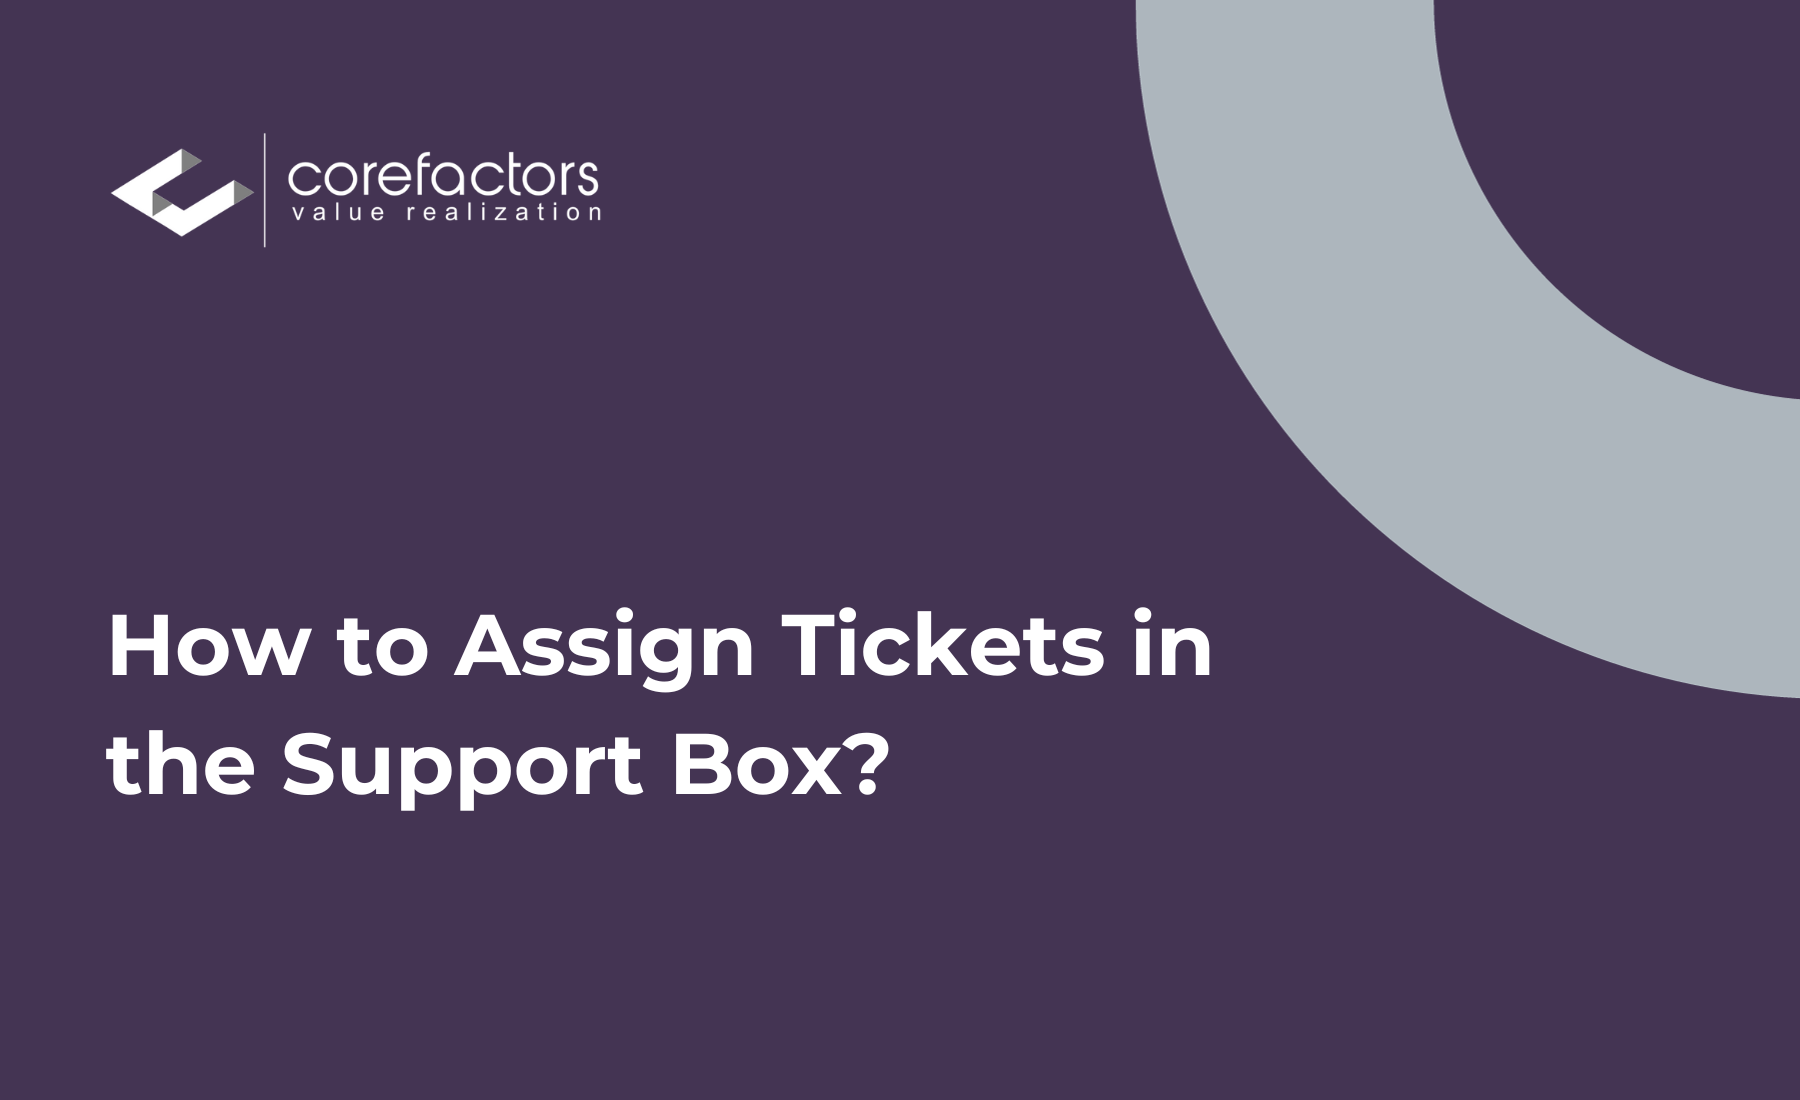 How to assign tickets in the Support Box of the Corefactors CRM?